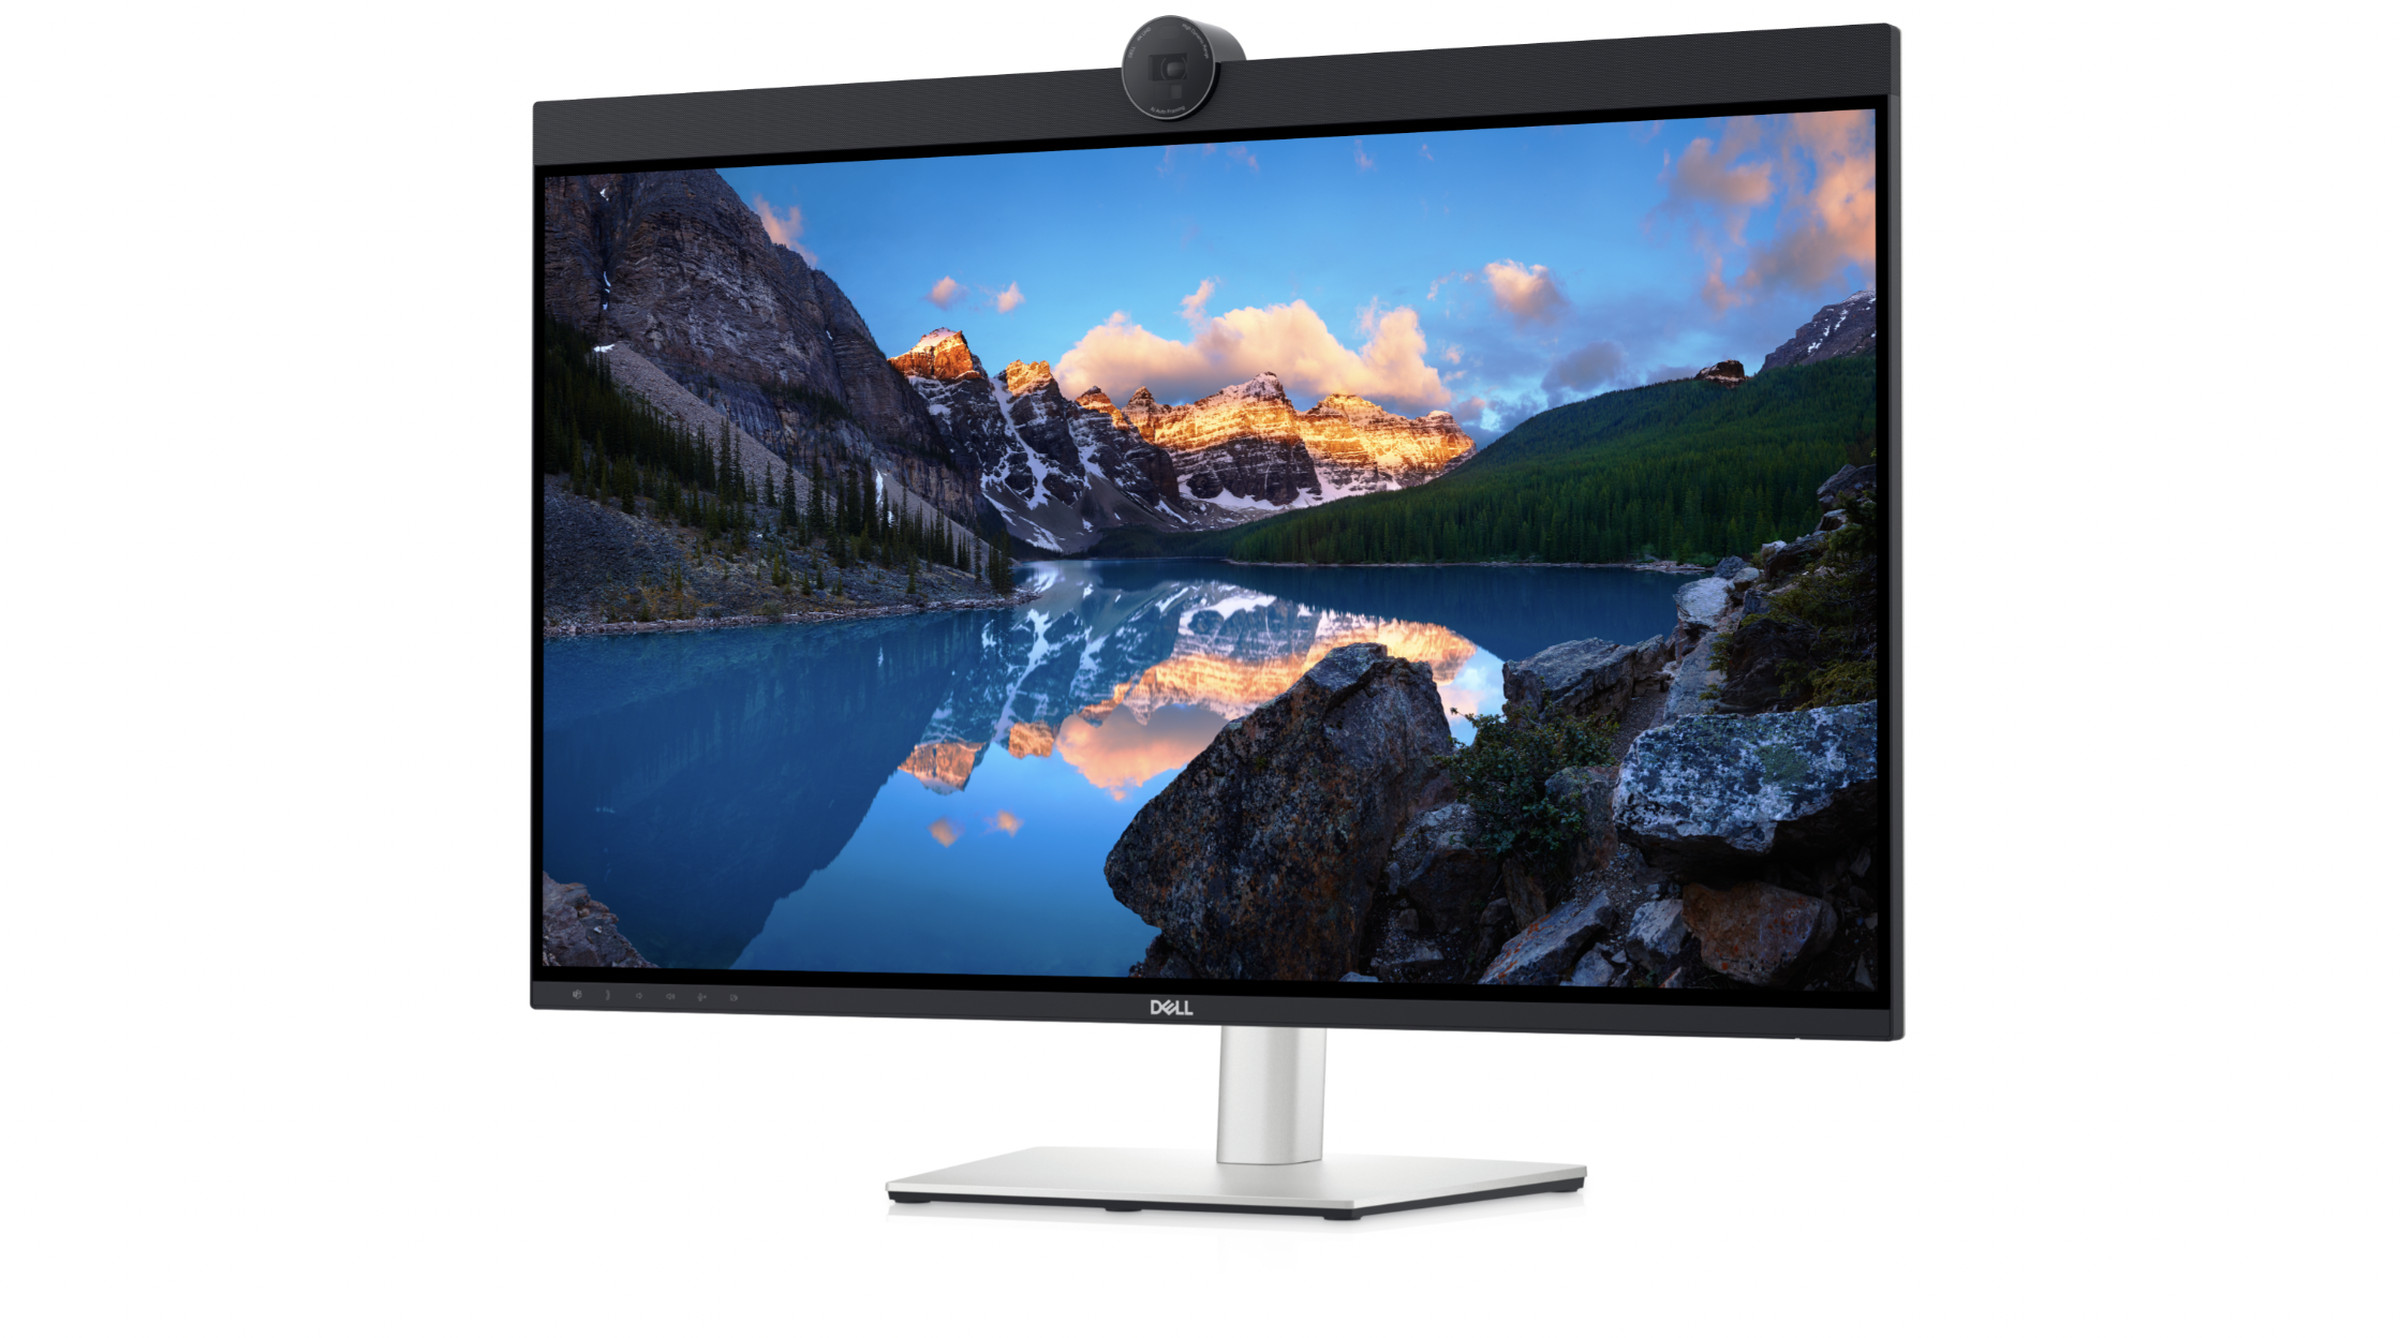 The monitor comes with a 4K Sony Starvis webcam and two noise-canceling mics.